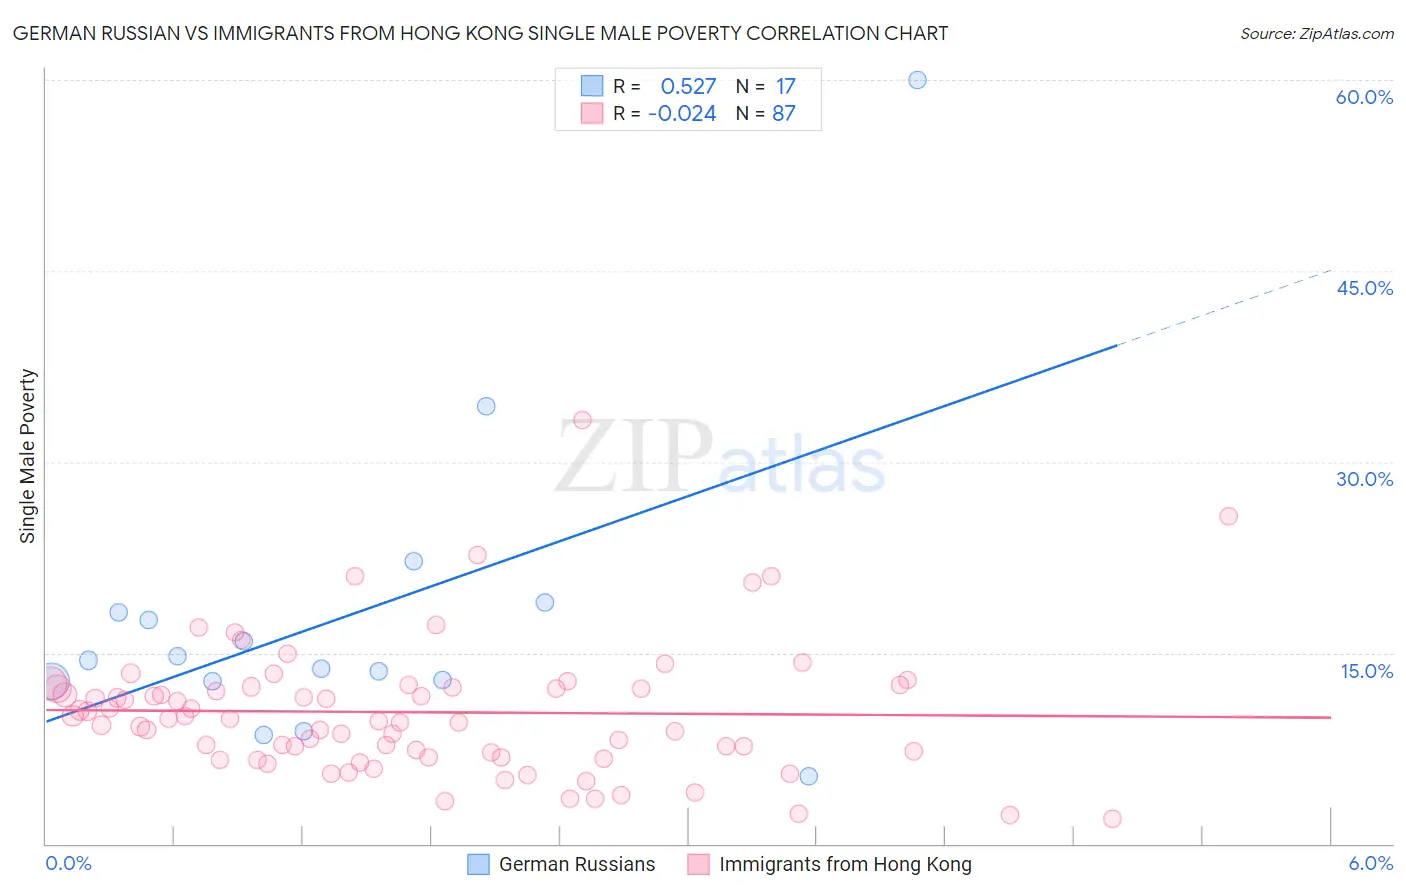 German Russian vs Immigrants from Hong Kong Single Male Poverty